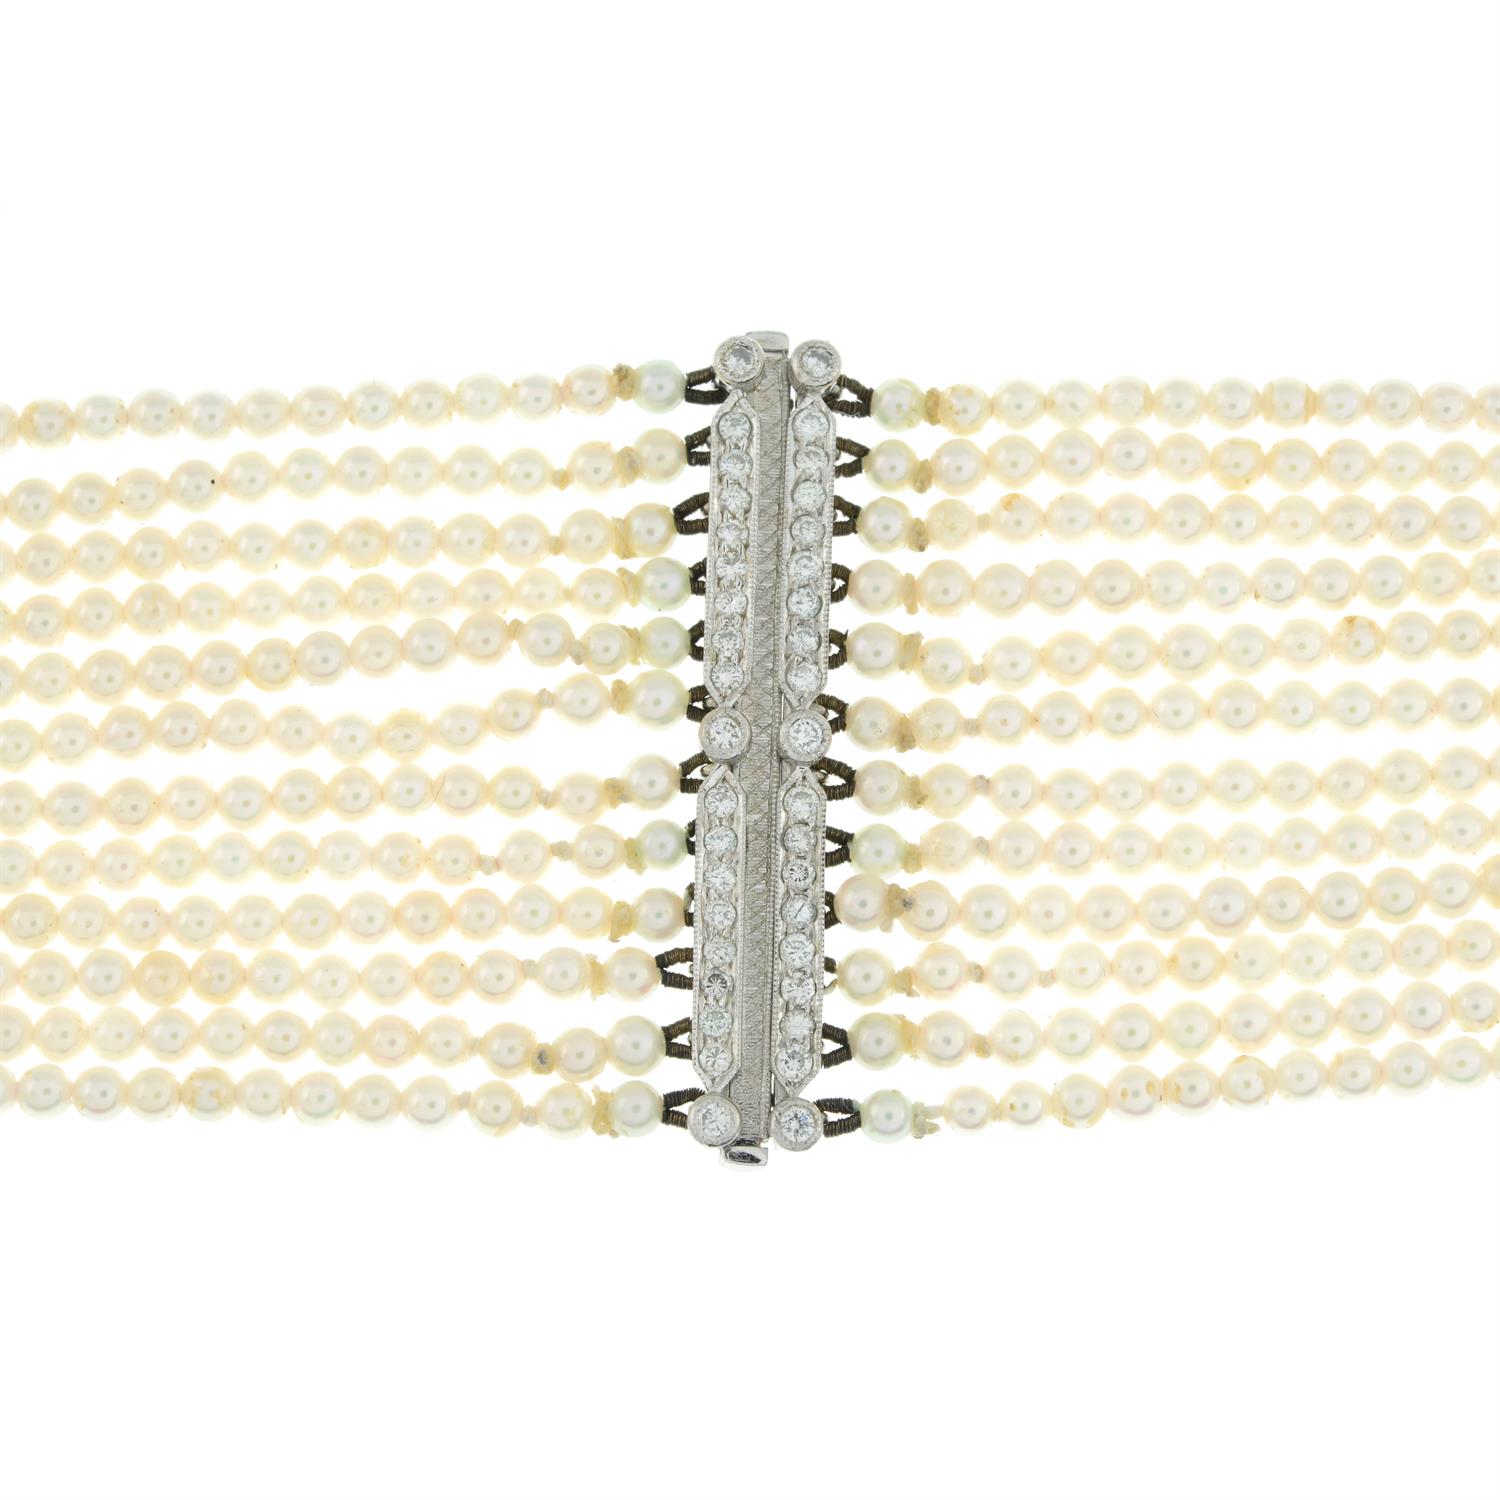 Seed pearl and diamond choker necklace, by Adler - Image 4 of 6